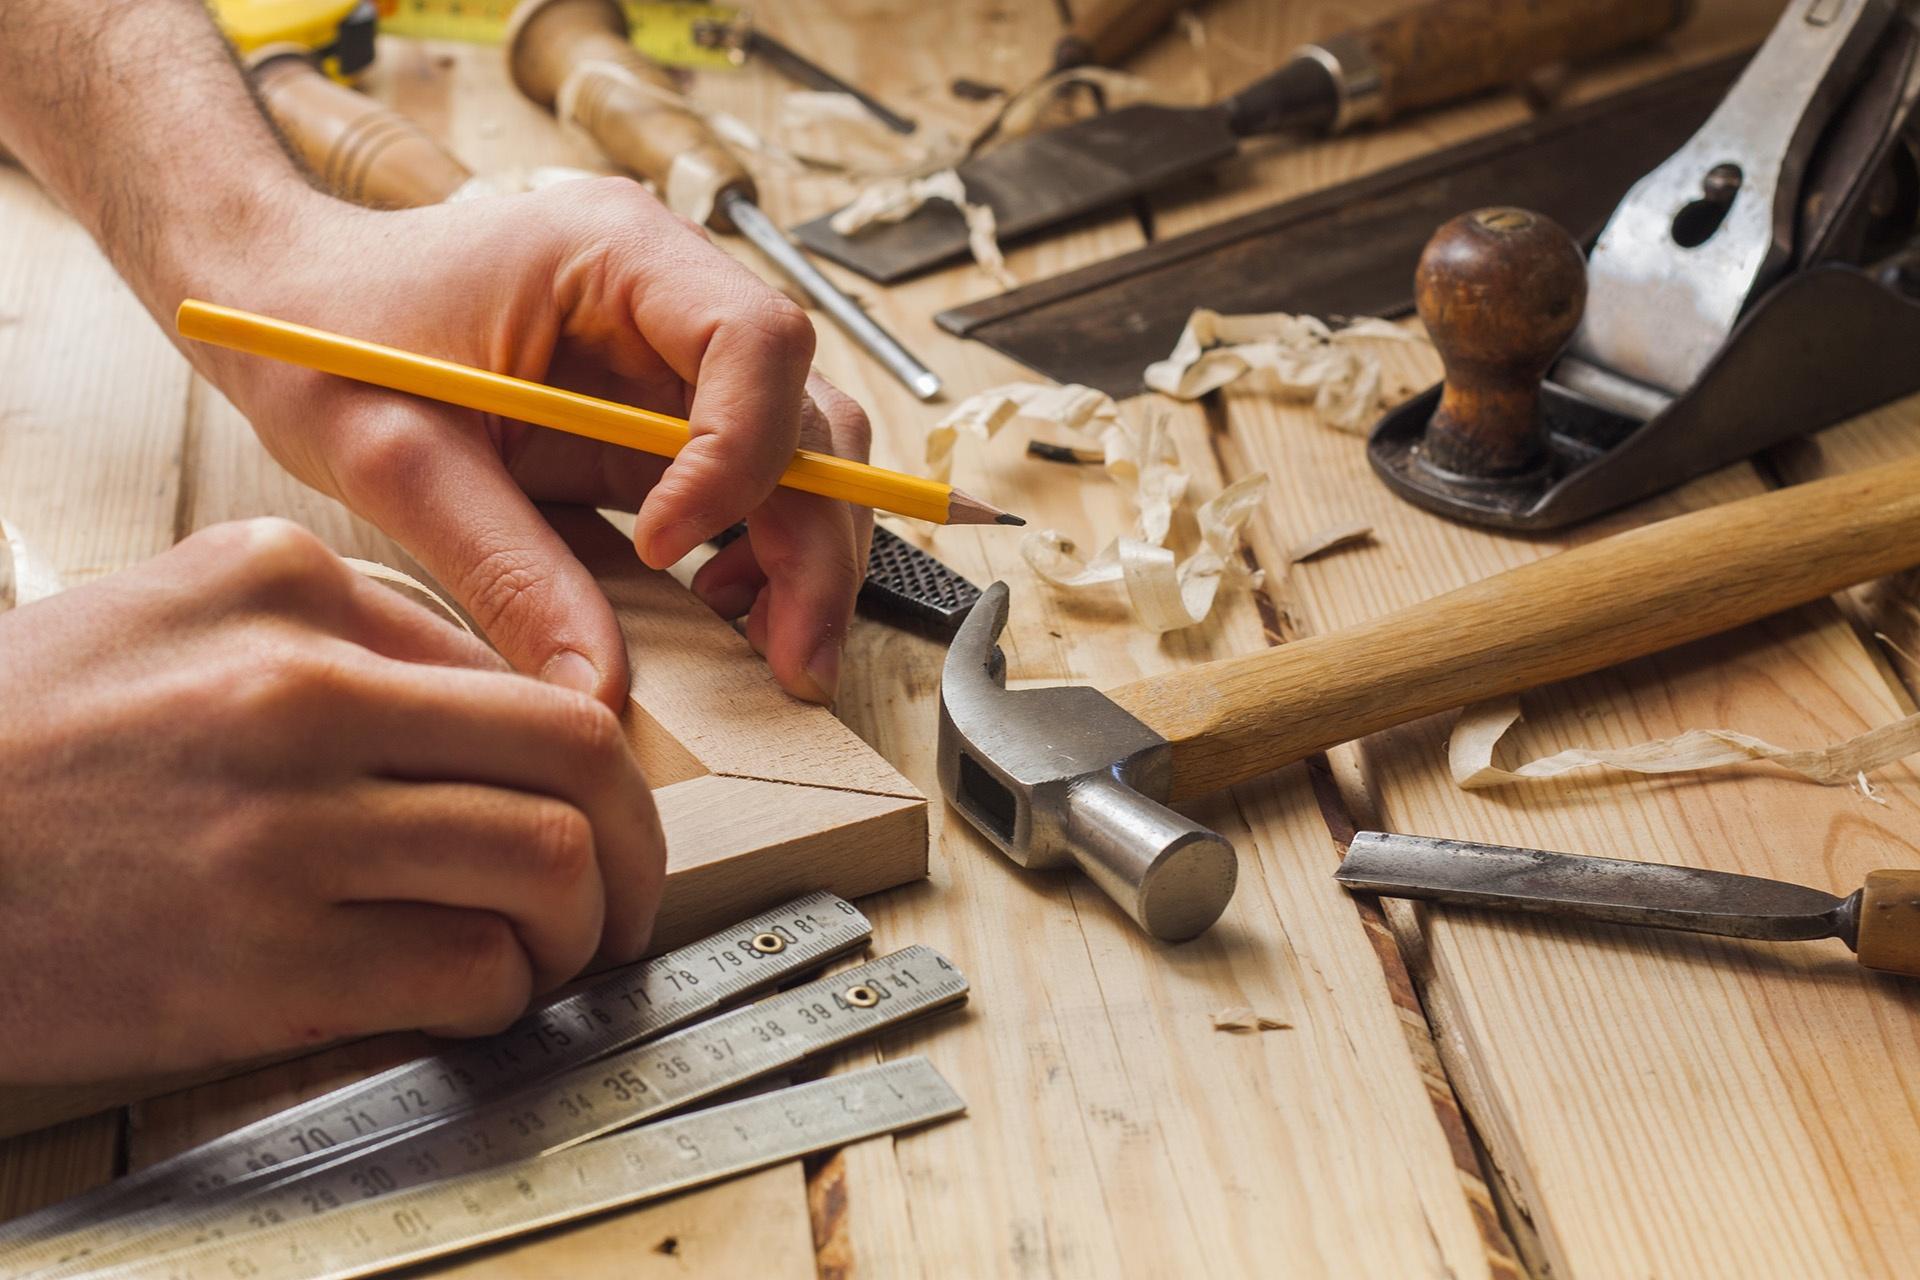 Guide to Carpentry Skills Assessment and how to pass it